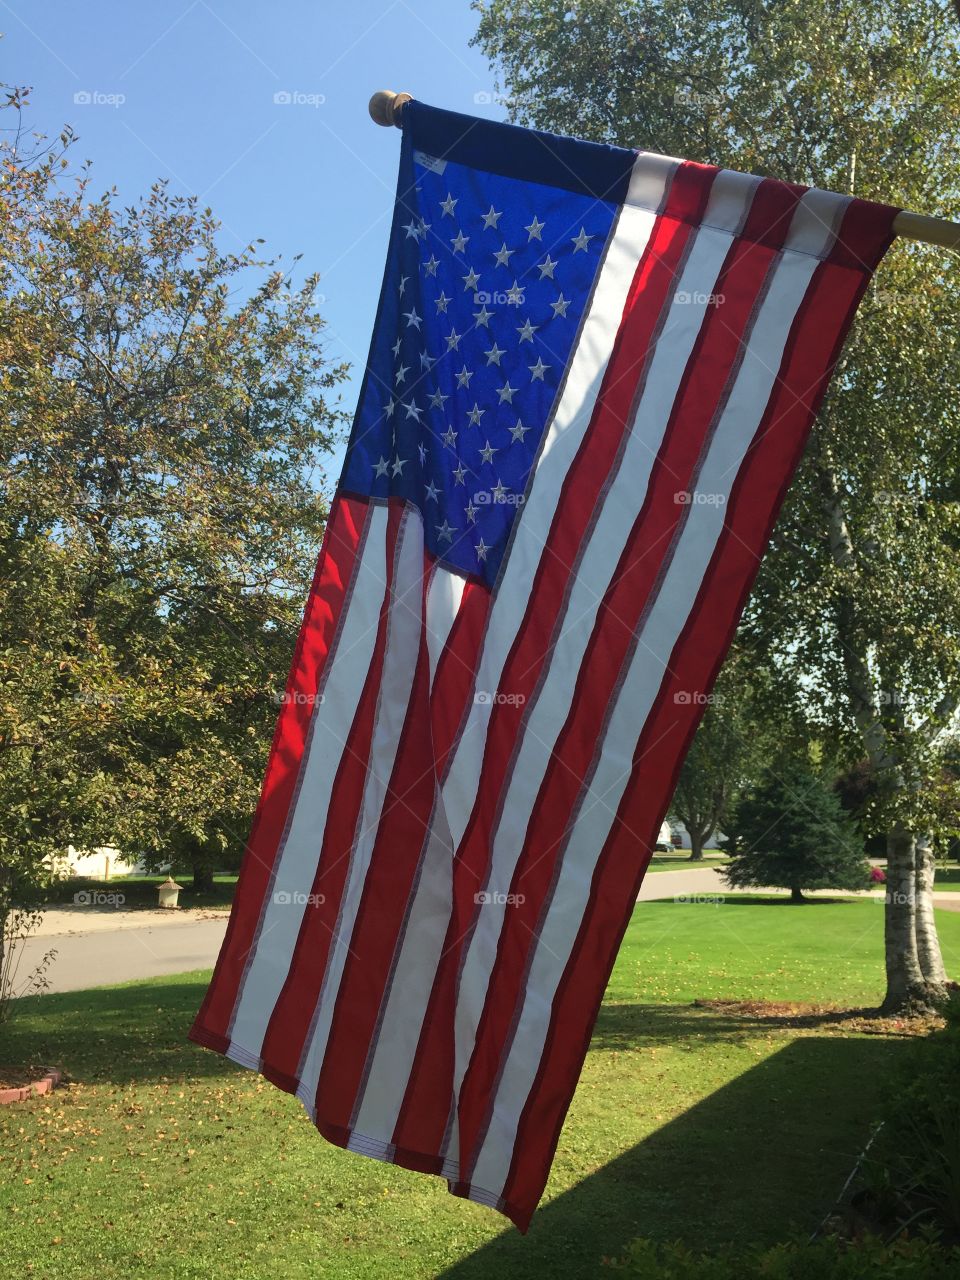 Flag in front house 9/15/17